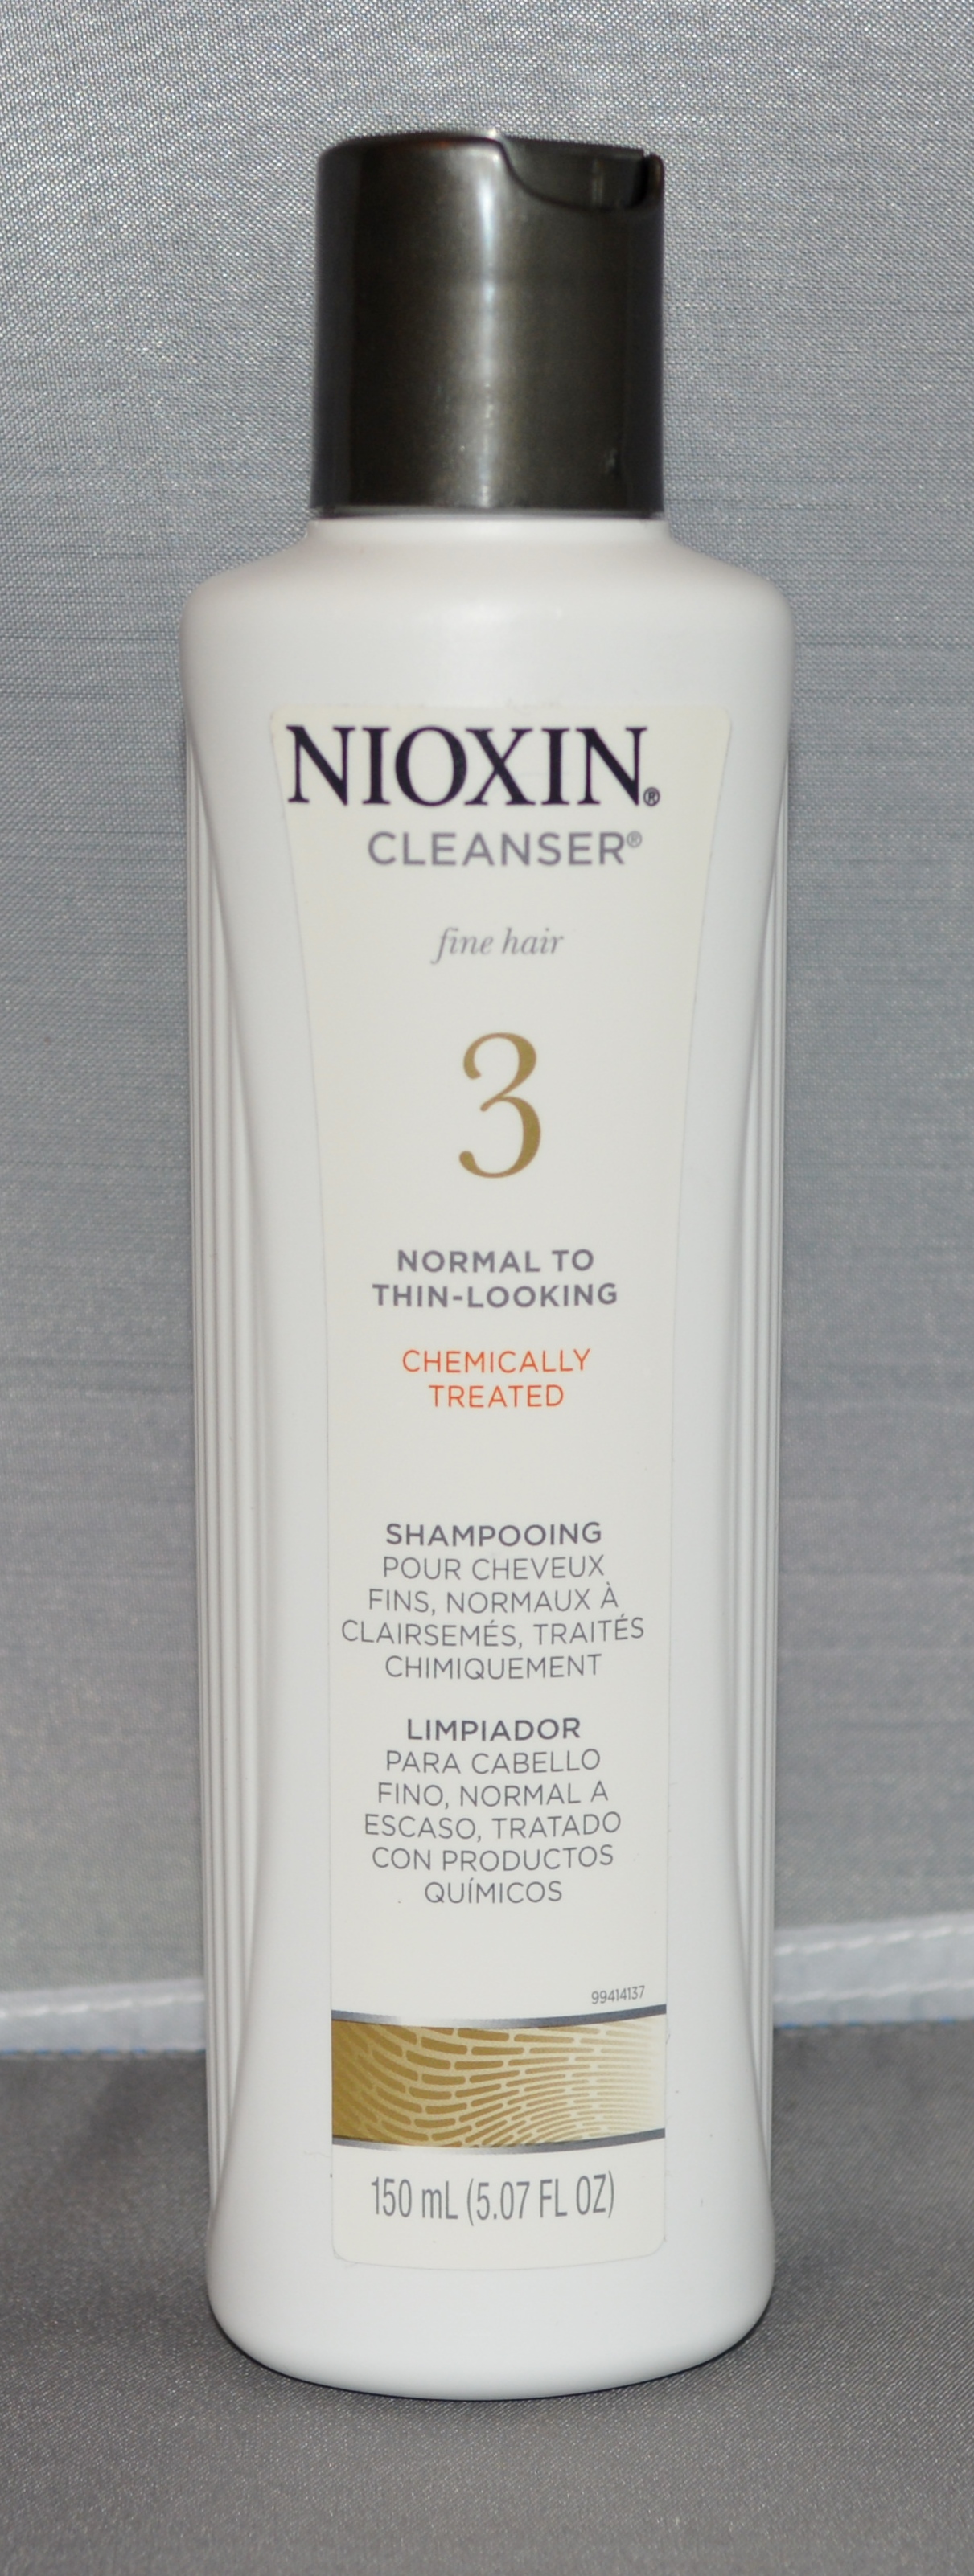 Nioxin Cleanser System 3 Fine/Treated/Normal to Thin-Looking Hair 5.07 oz